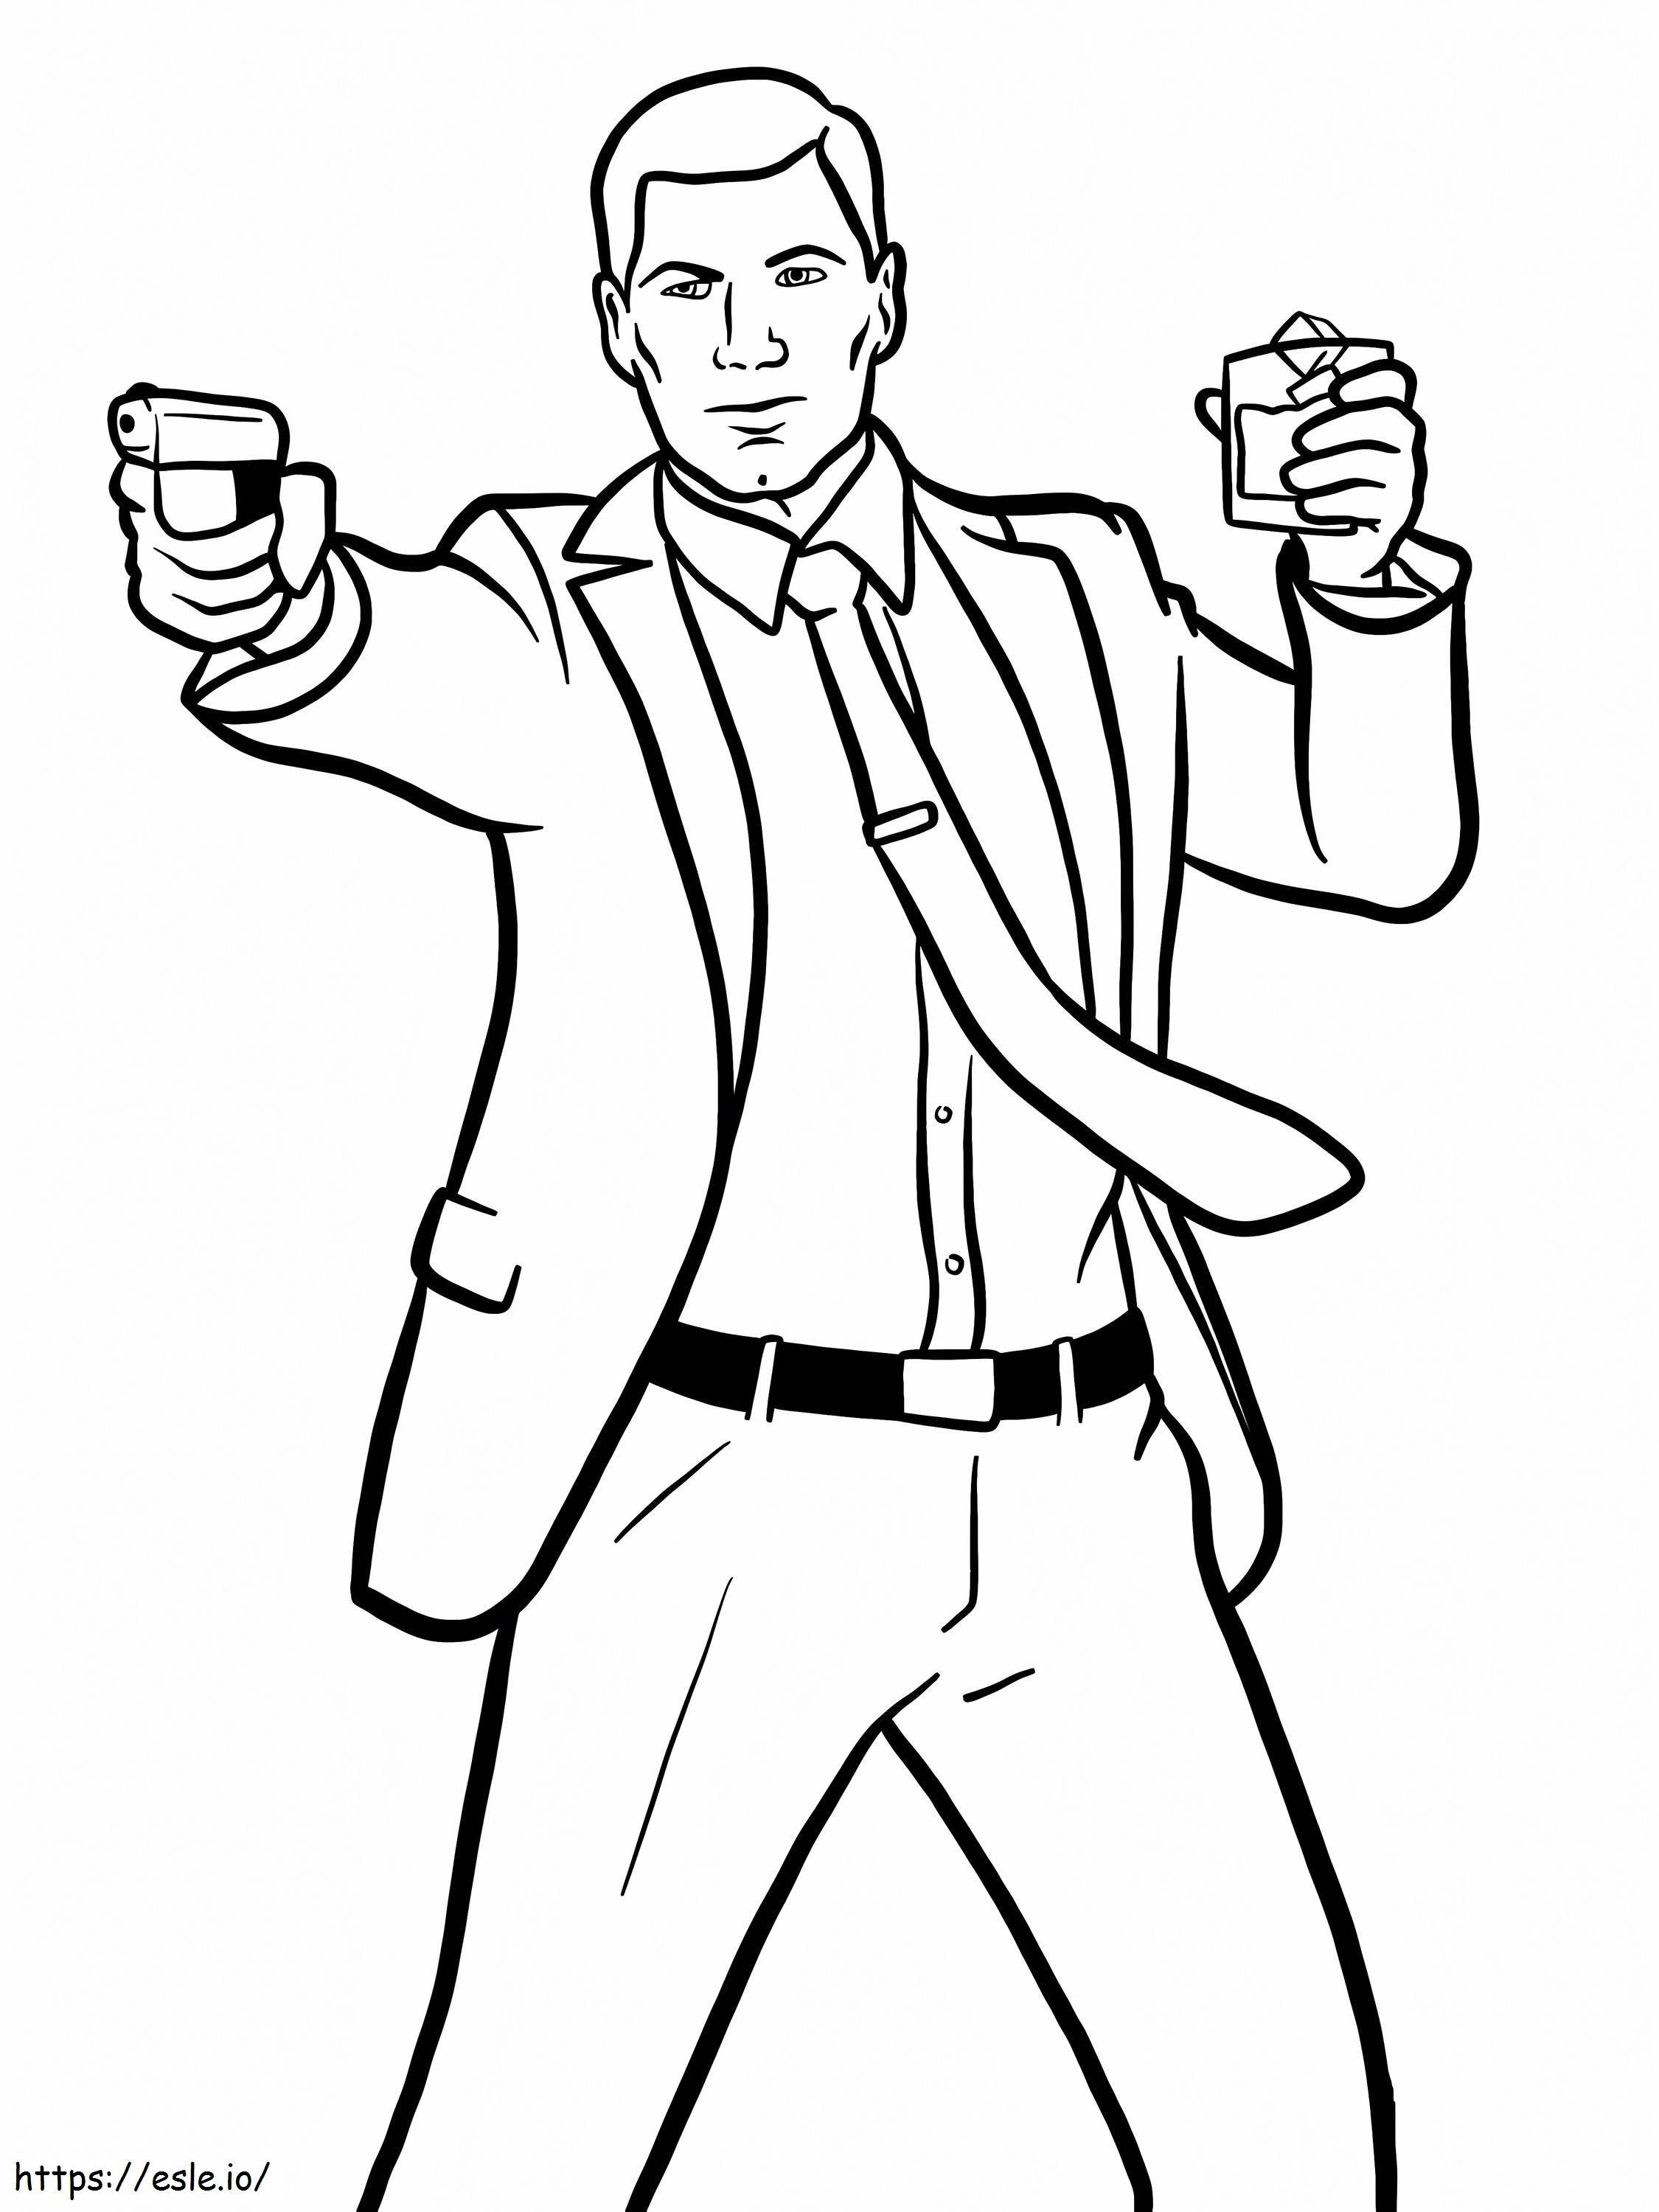 Sterling Archer coloring page